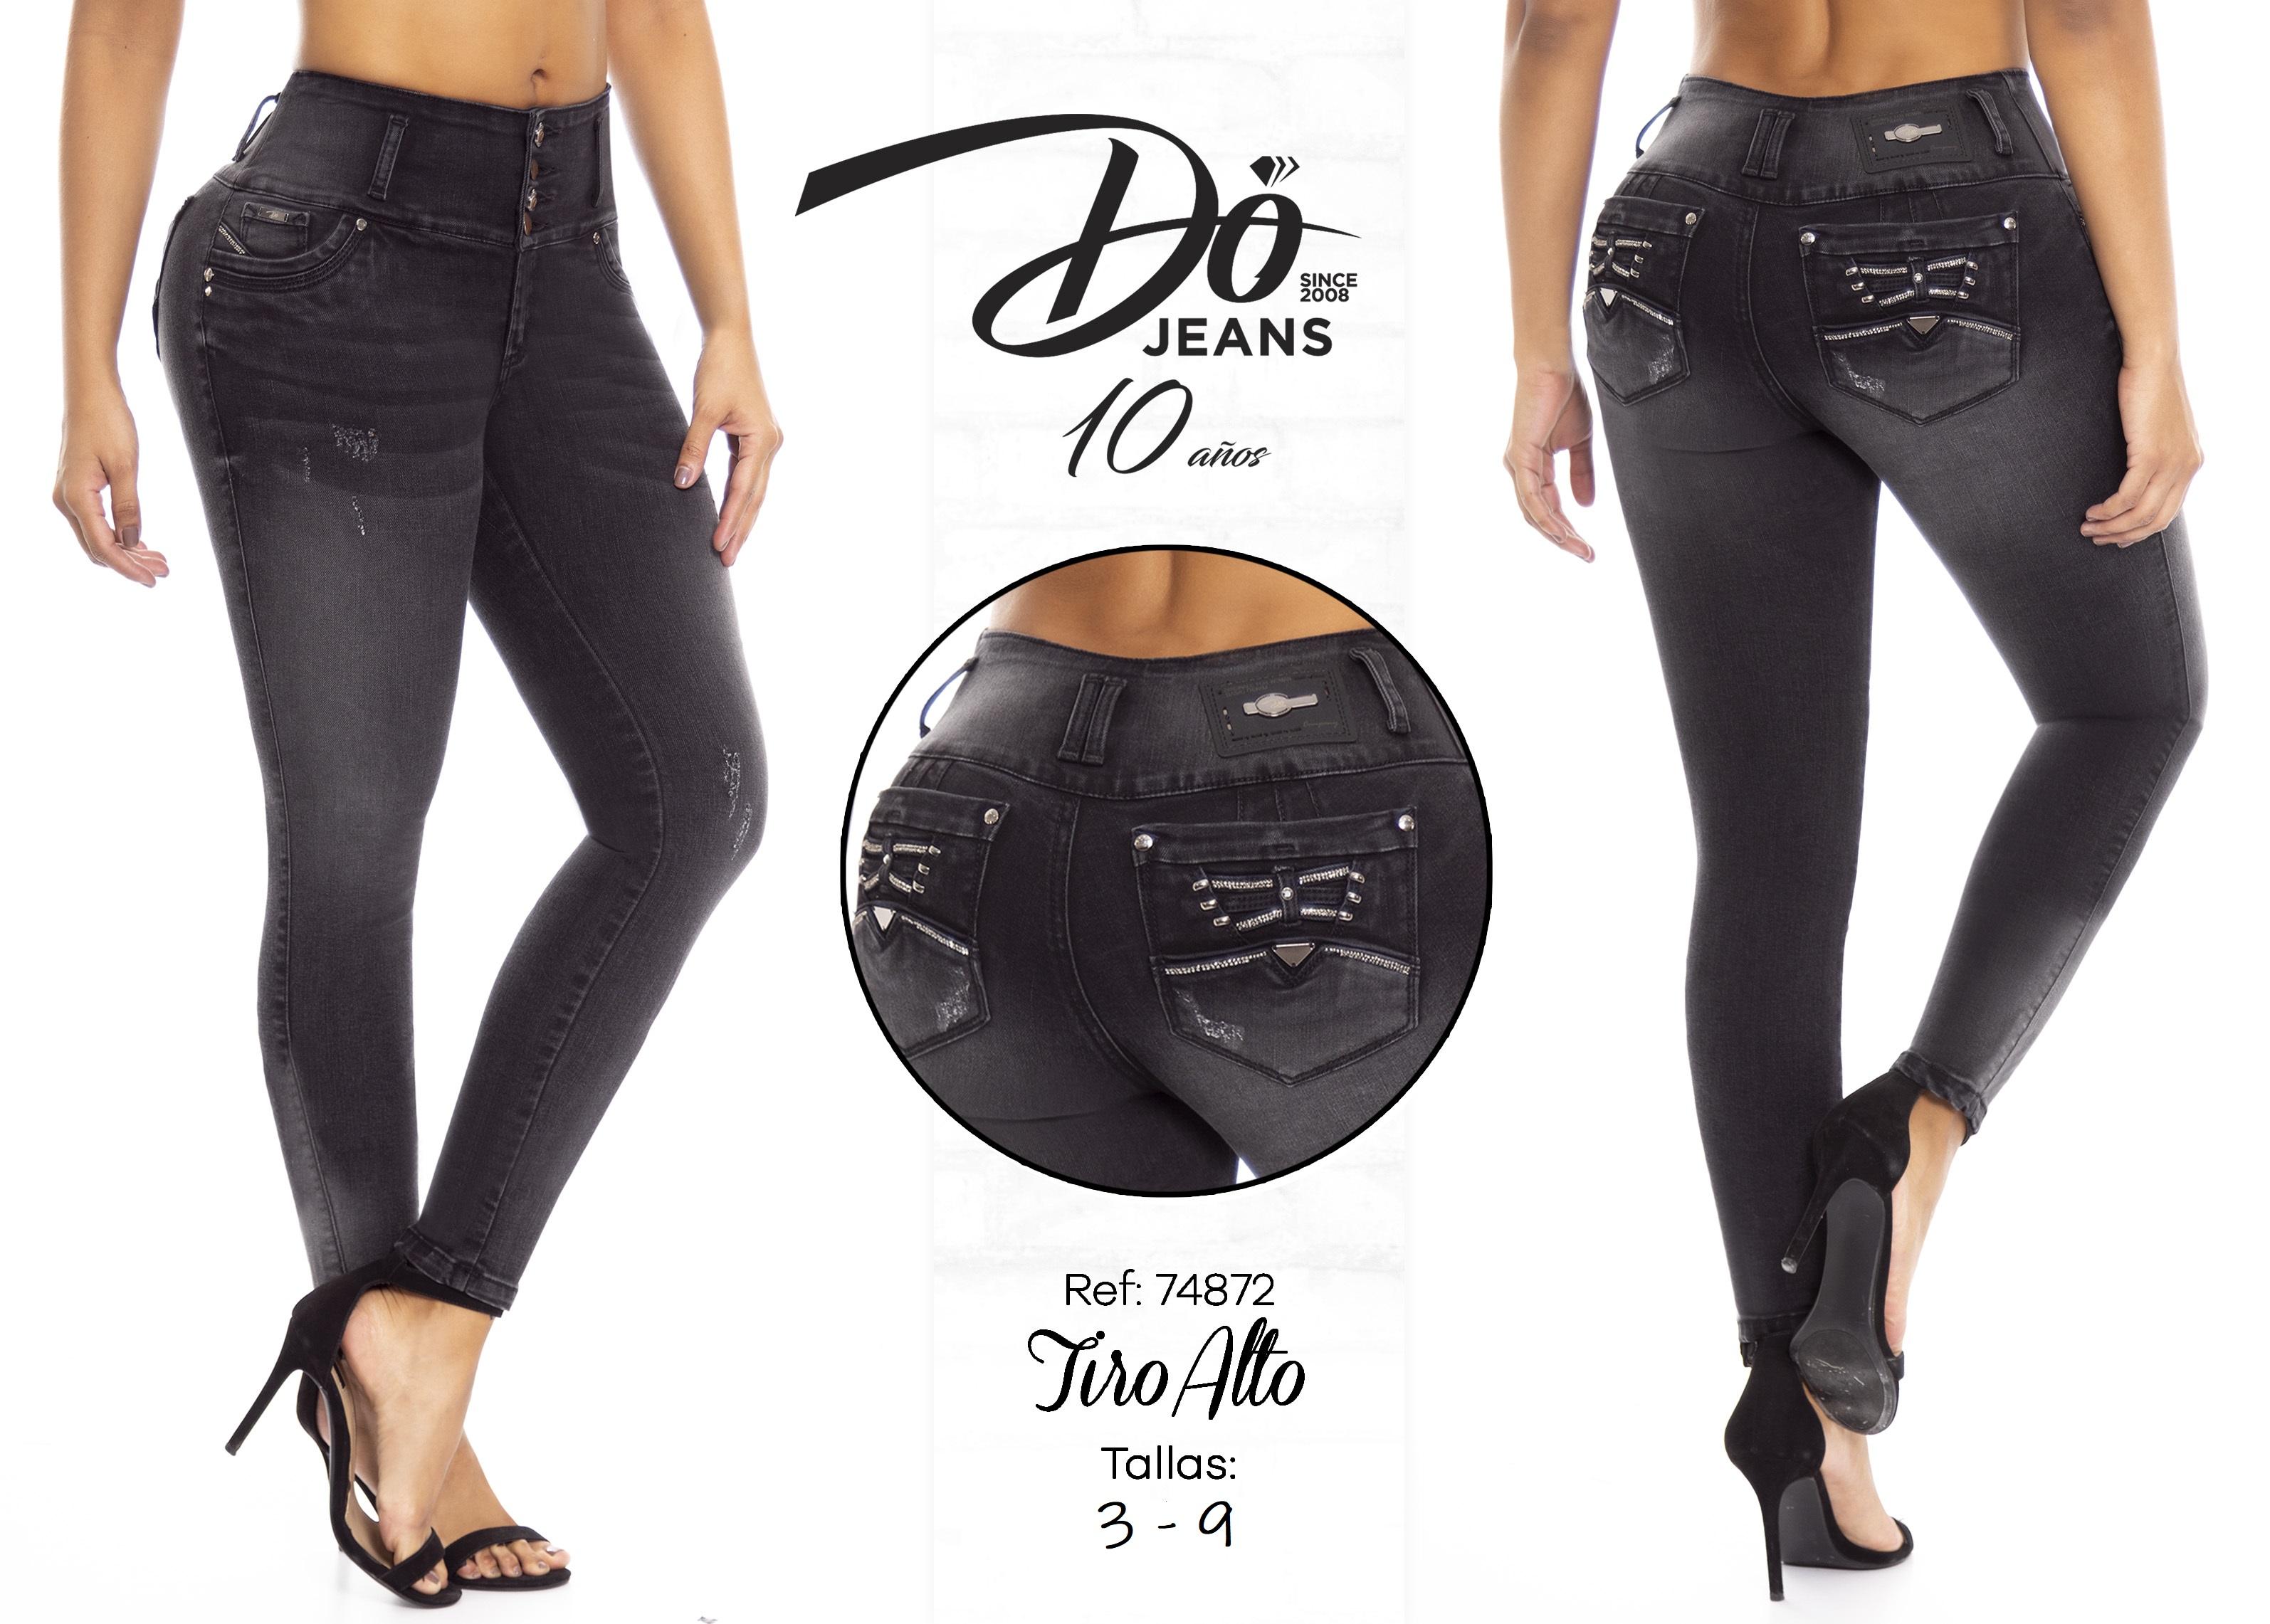 Jeans Levantacola Colombiano - Ref. 248 -74872 D